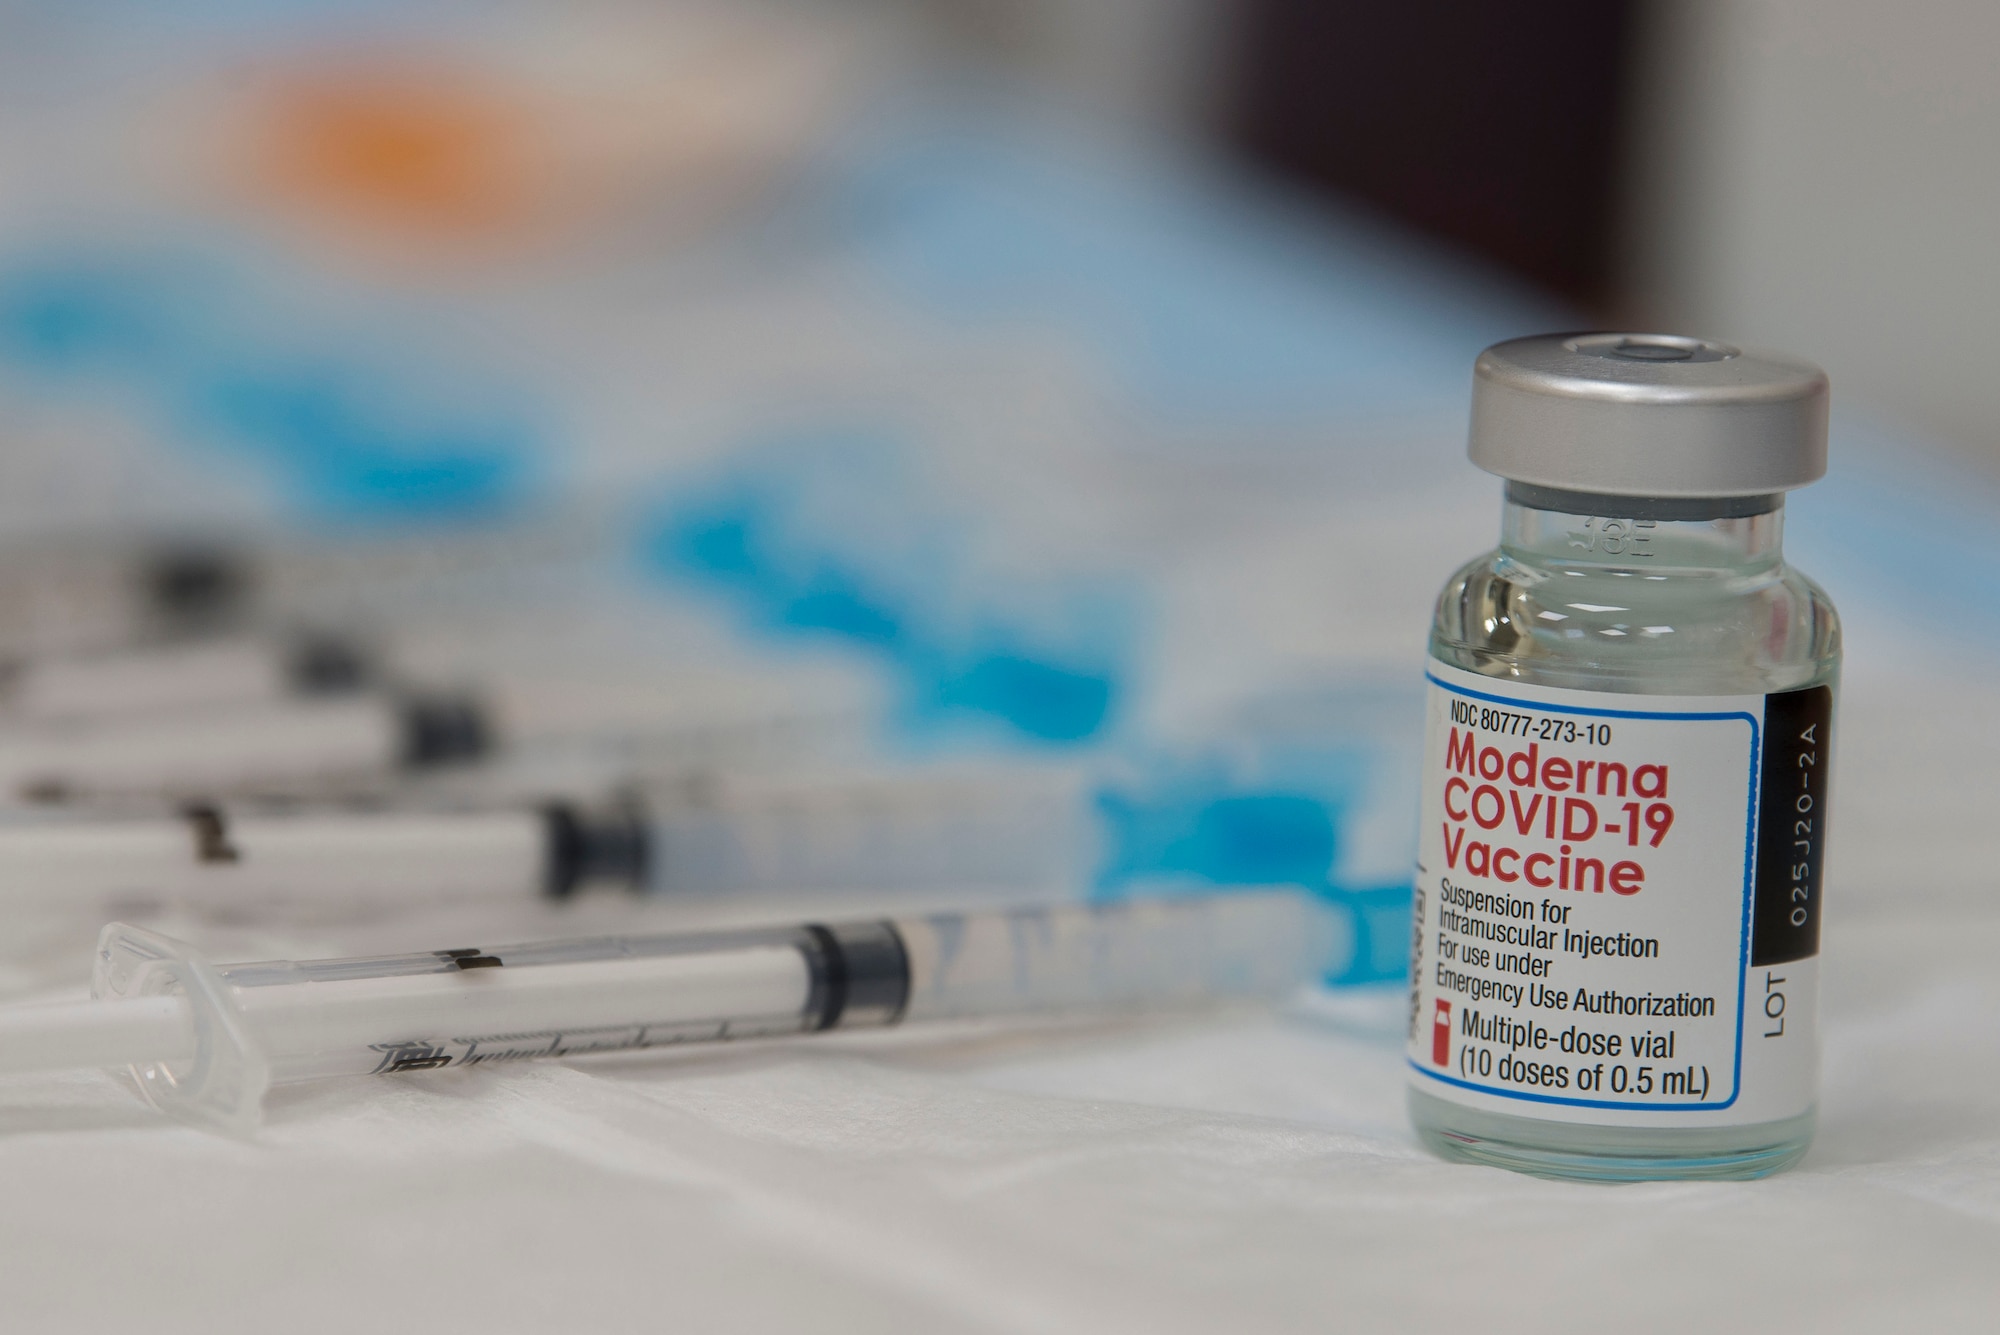 Syringes filled with COVID-19 vaccine lay at the ready at the 380th Expeditionary Medical Group (EMDG) clinic at Al Dhafra Air Base (ADAB), United Arab Emirates, Jan. 25, 2021.